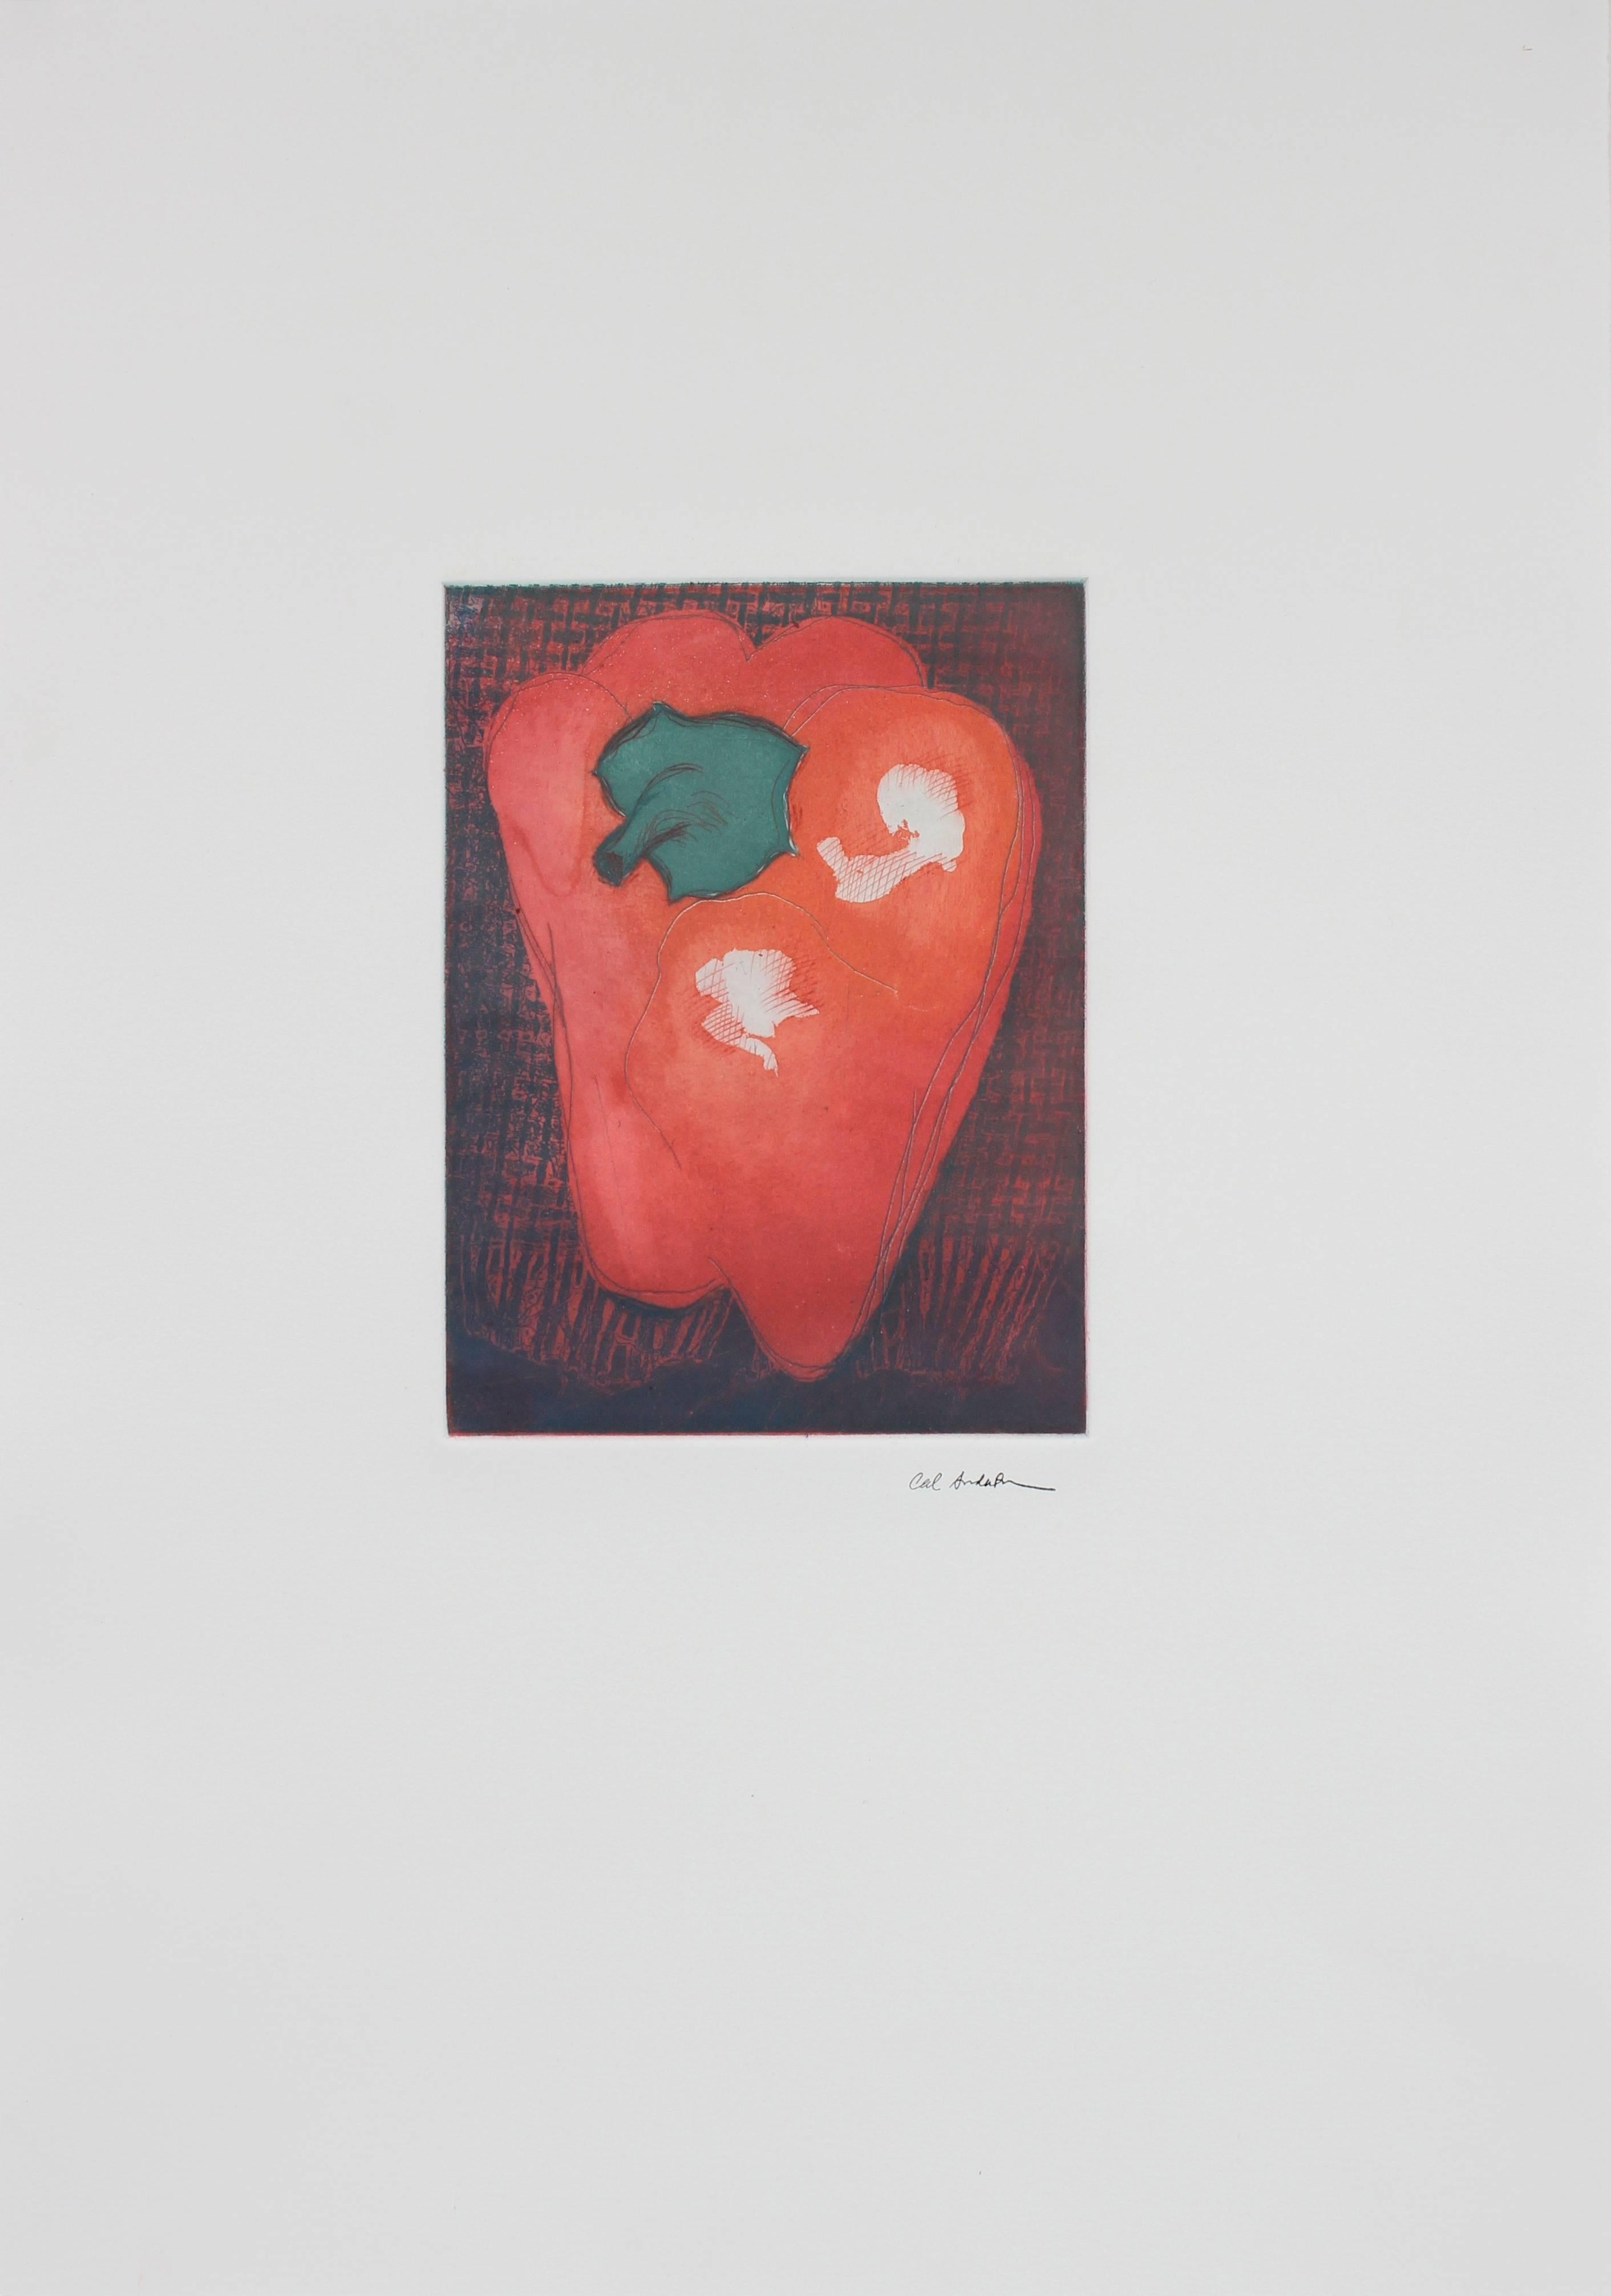 Red Bell Pepper Etching, Circa 2000 - Print by Calvin Anderson